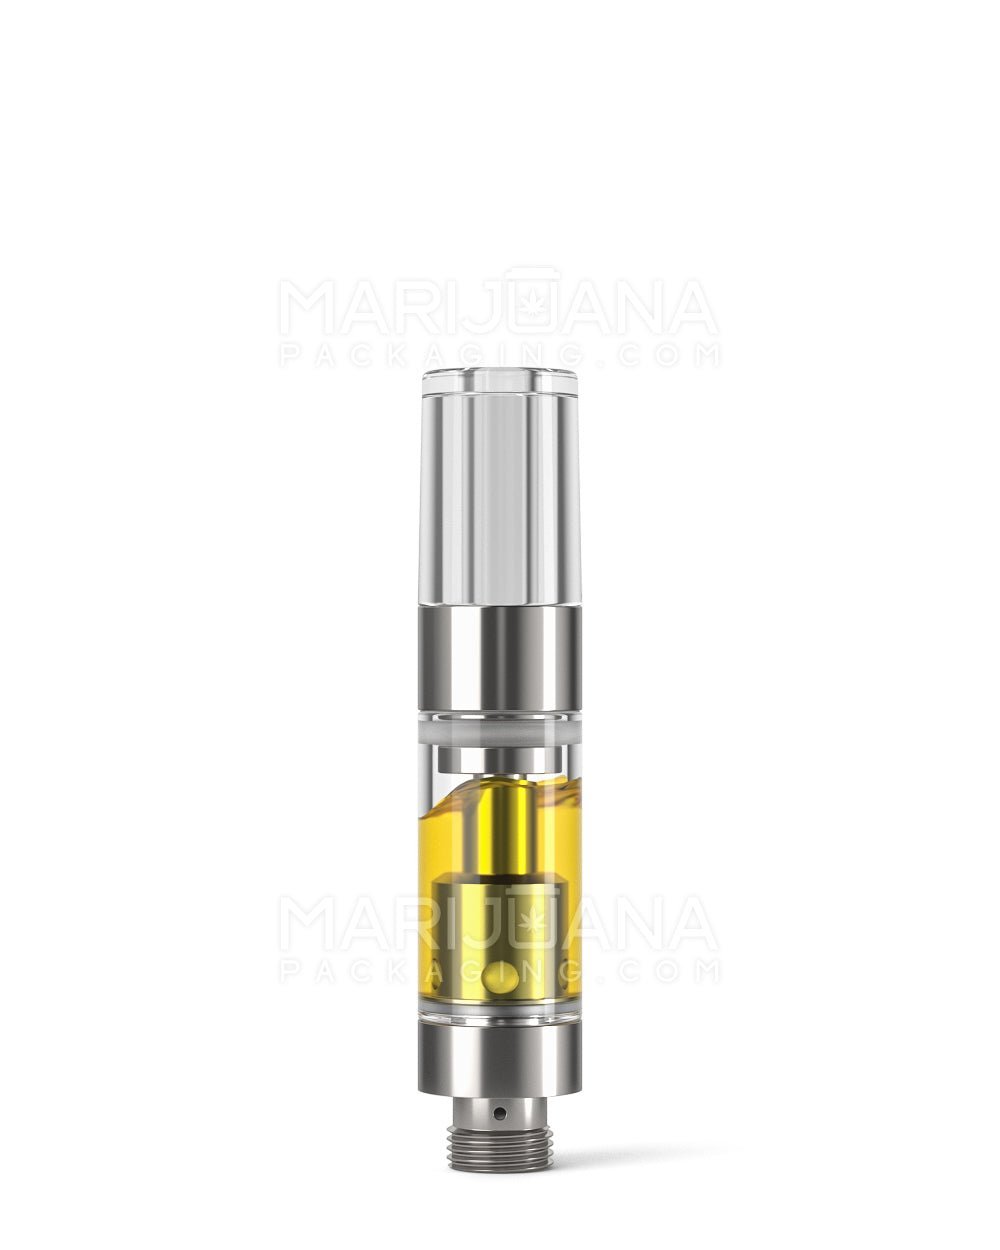 Ceramic Core Glass Vape Cartridge with Round Clear Plastic Mouthpiece | 0.5mL - Press On - 100 Count - 2